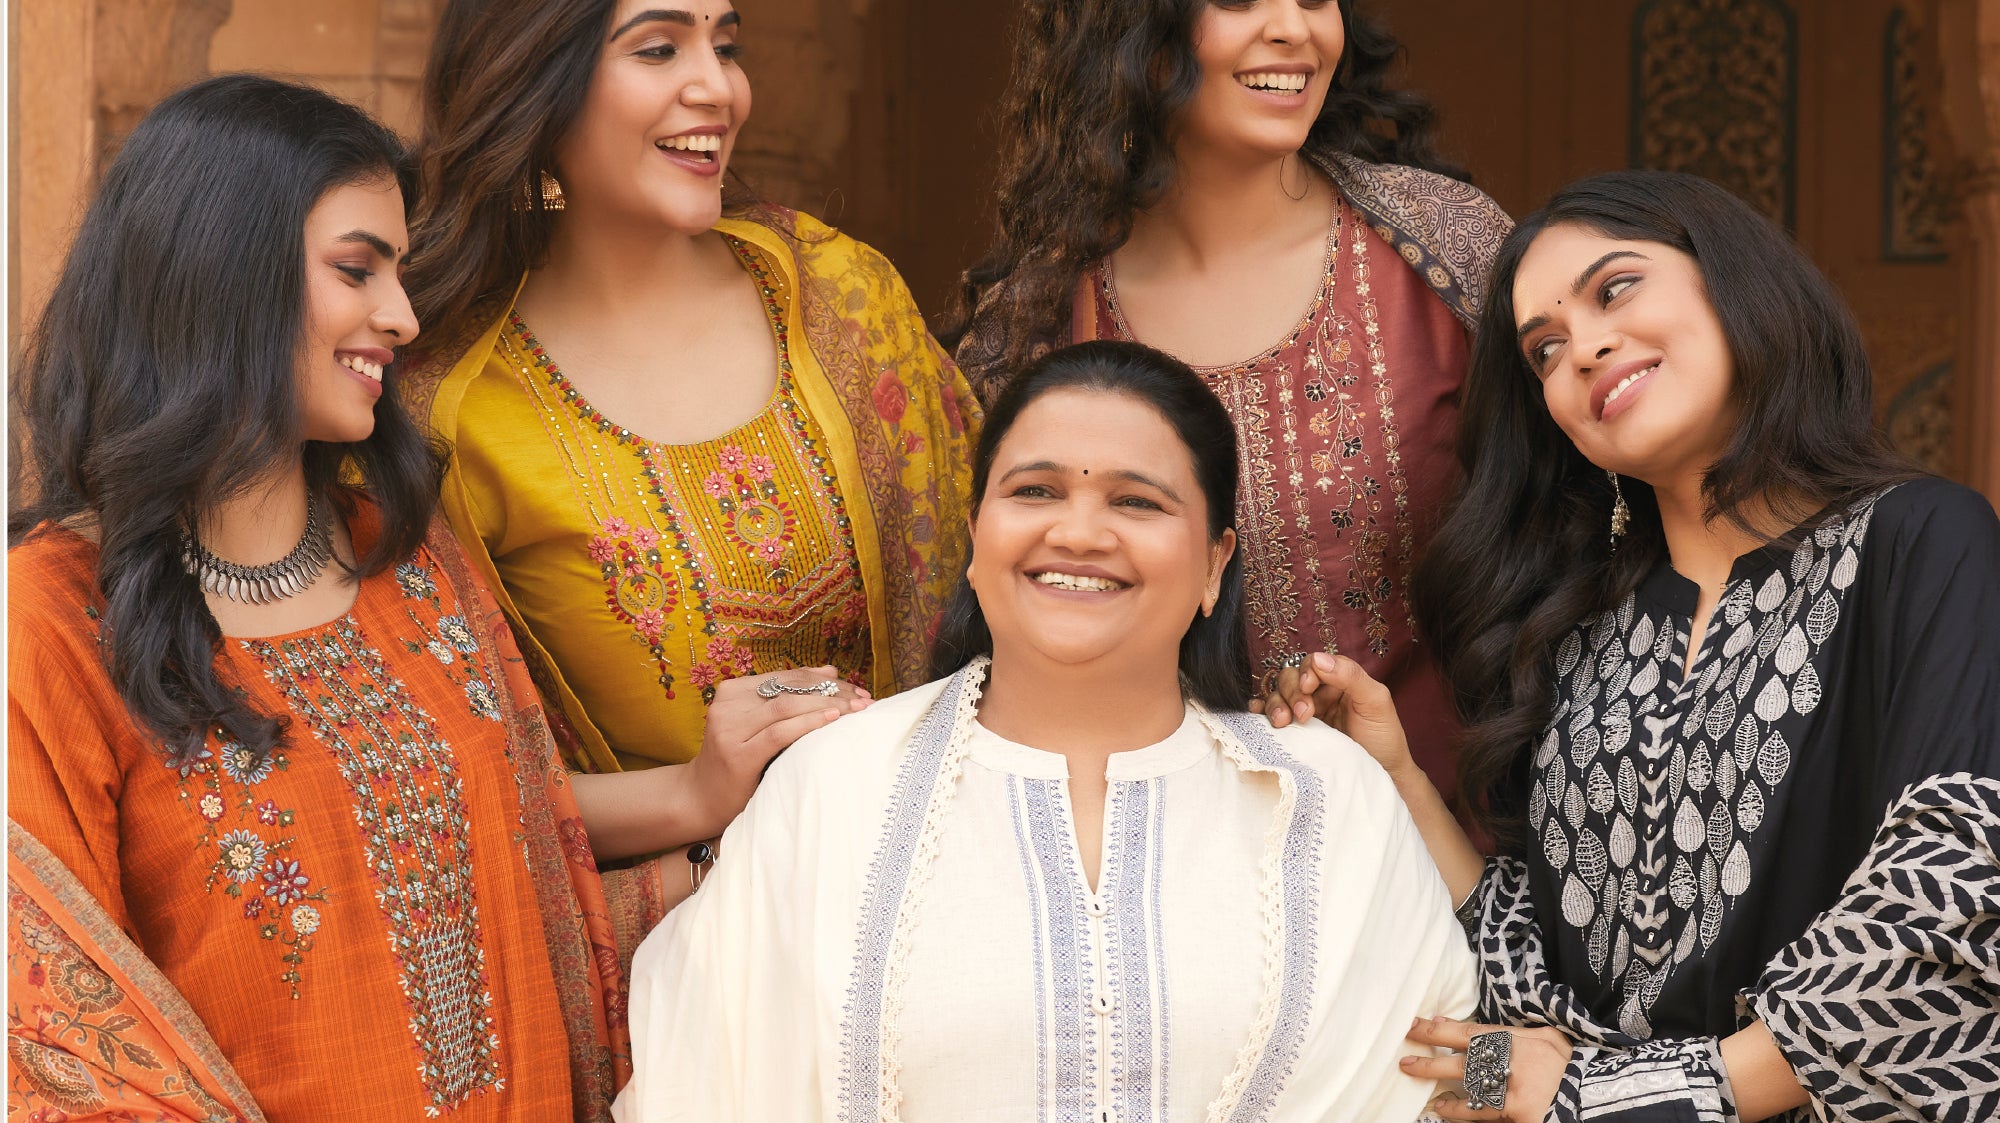 WOMEN PLUS INDIA – THE JOURNEY FROM OUR HEART TO YOURS!